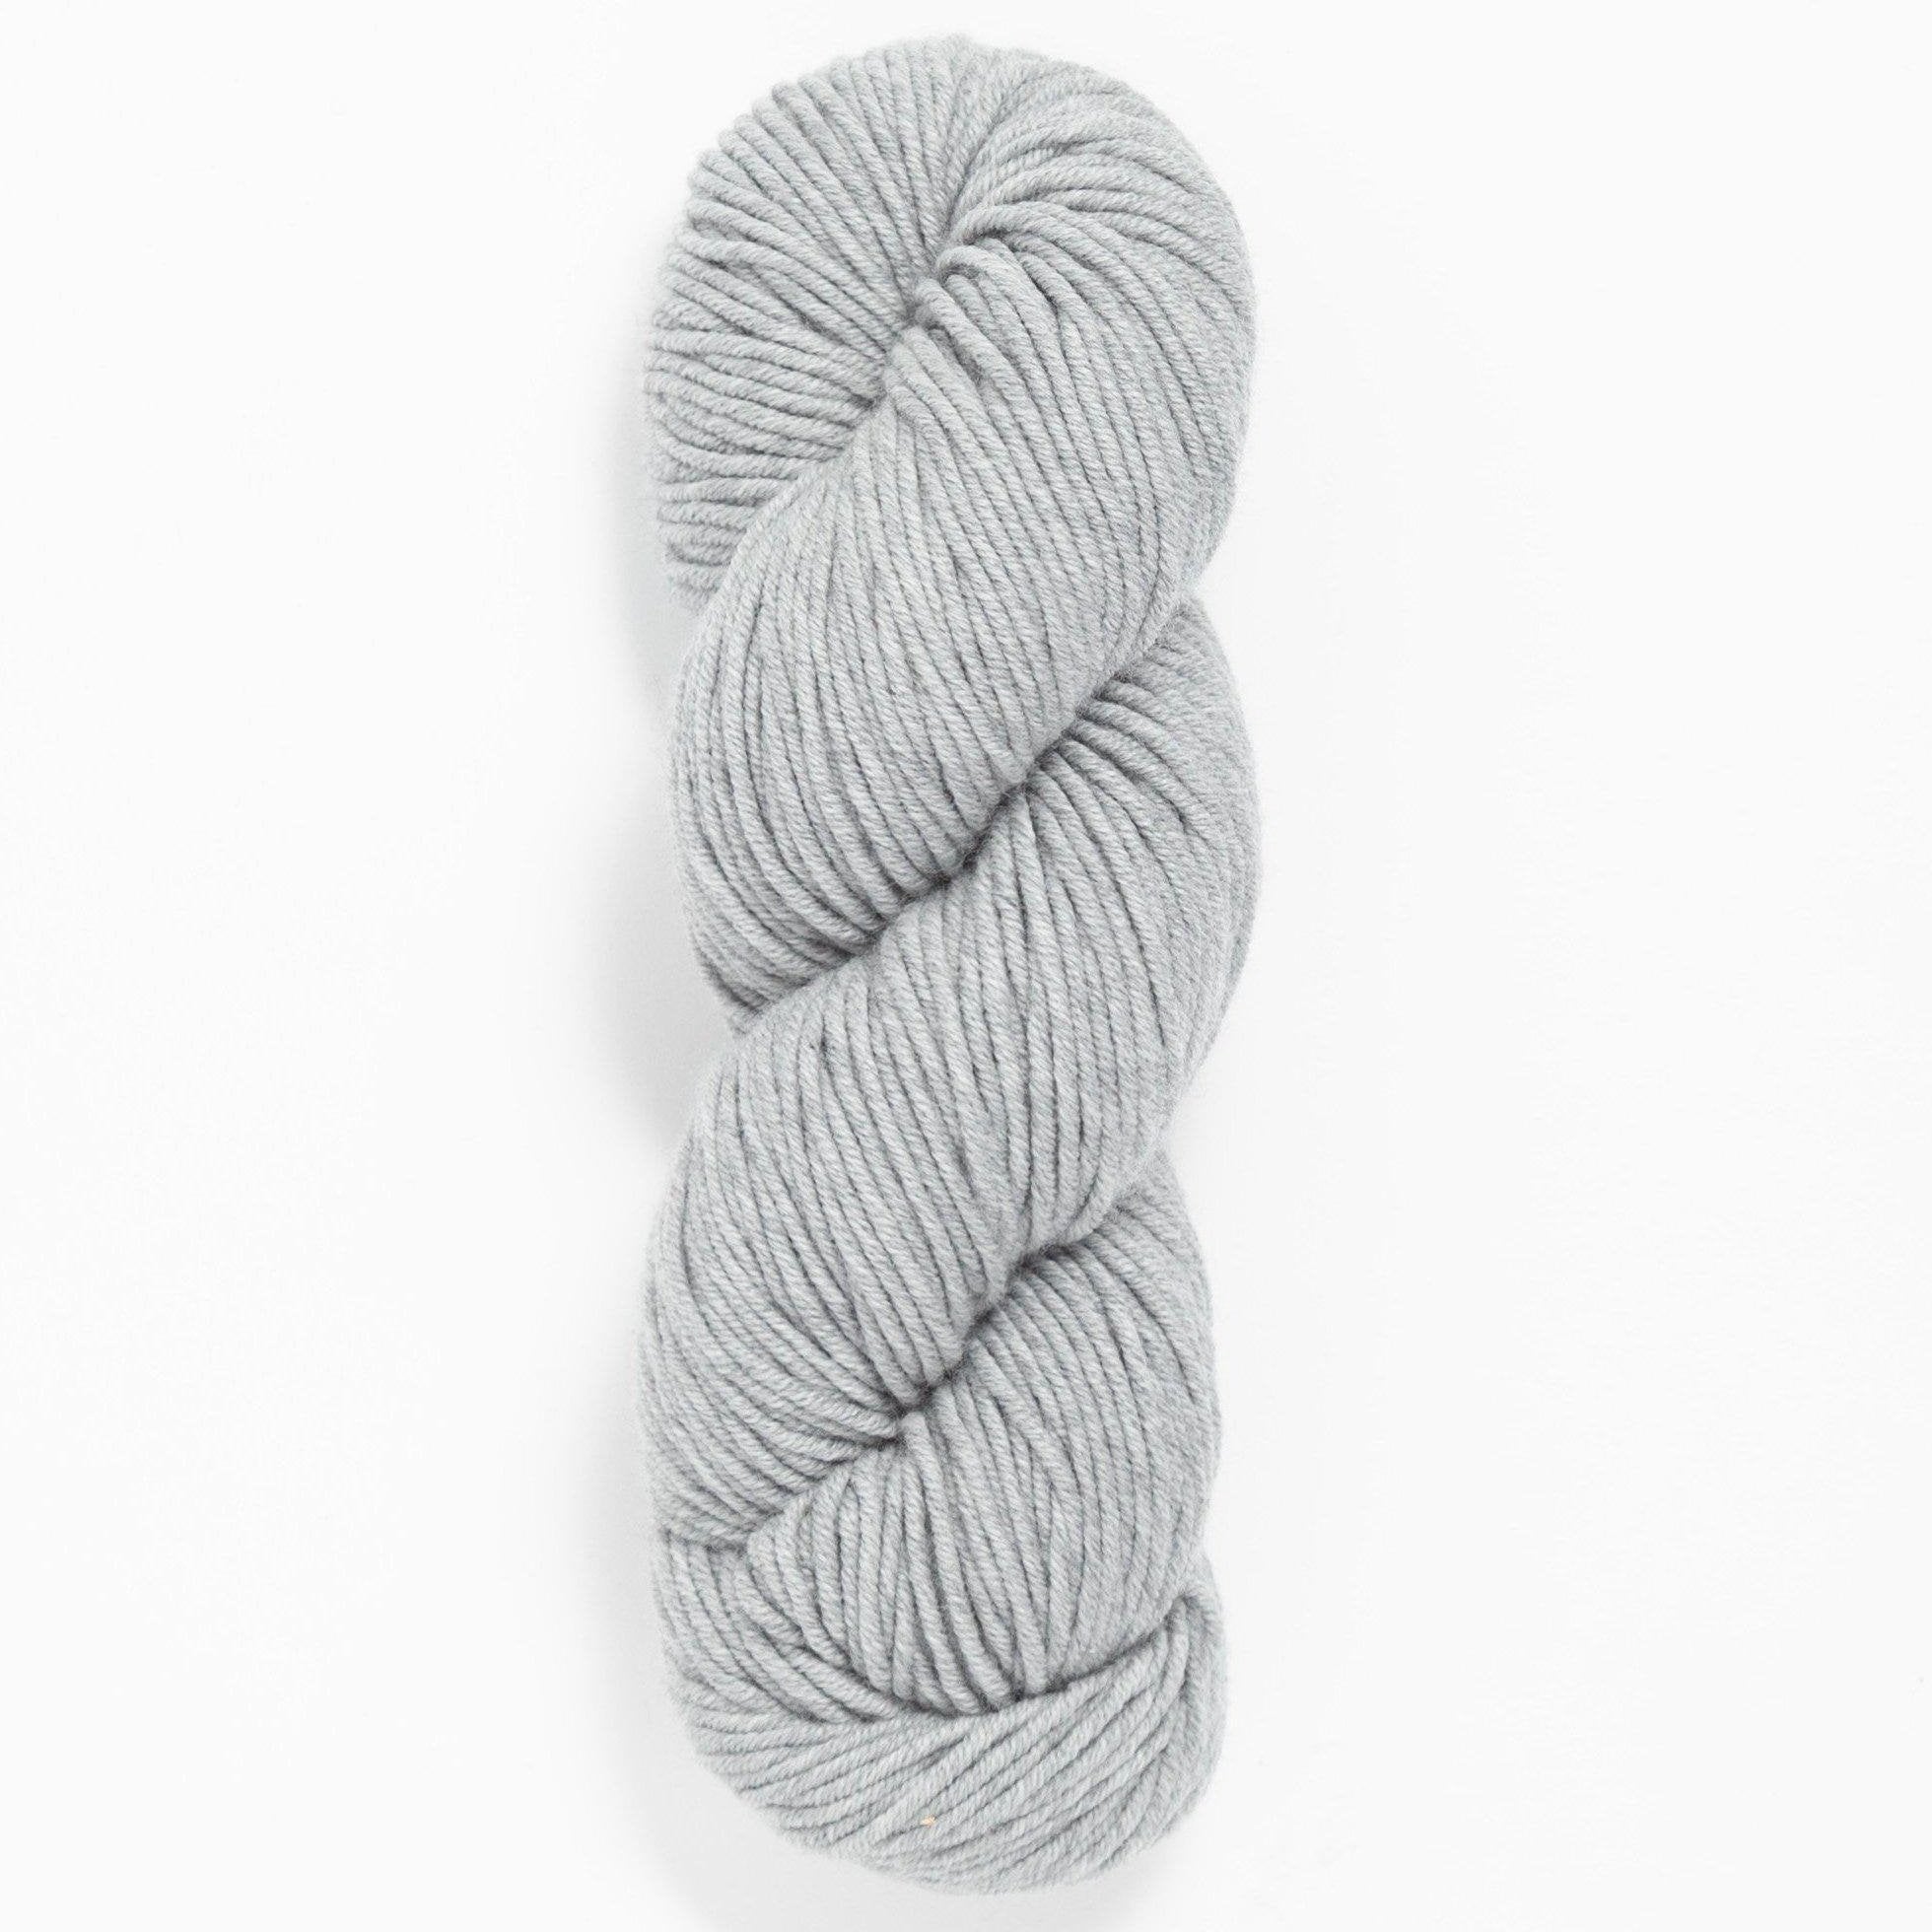 Best worsted weight yarns - Gathered